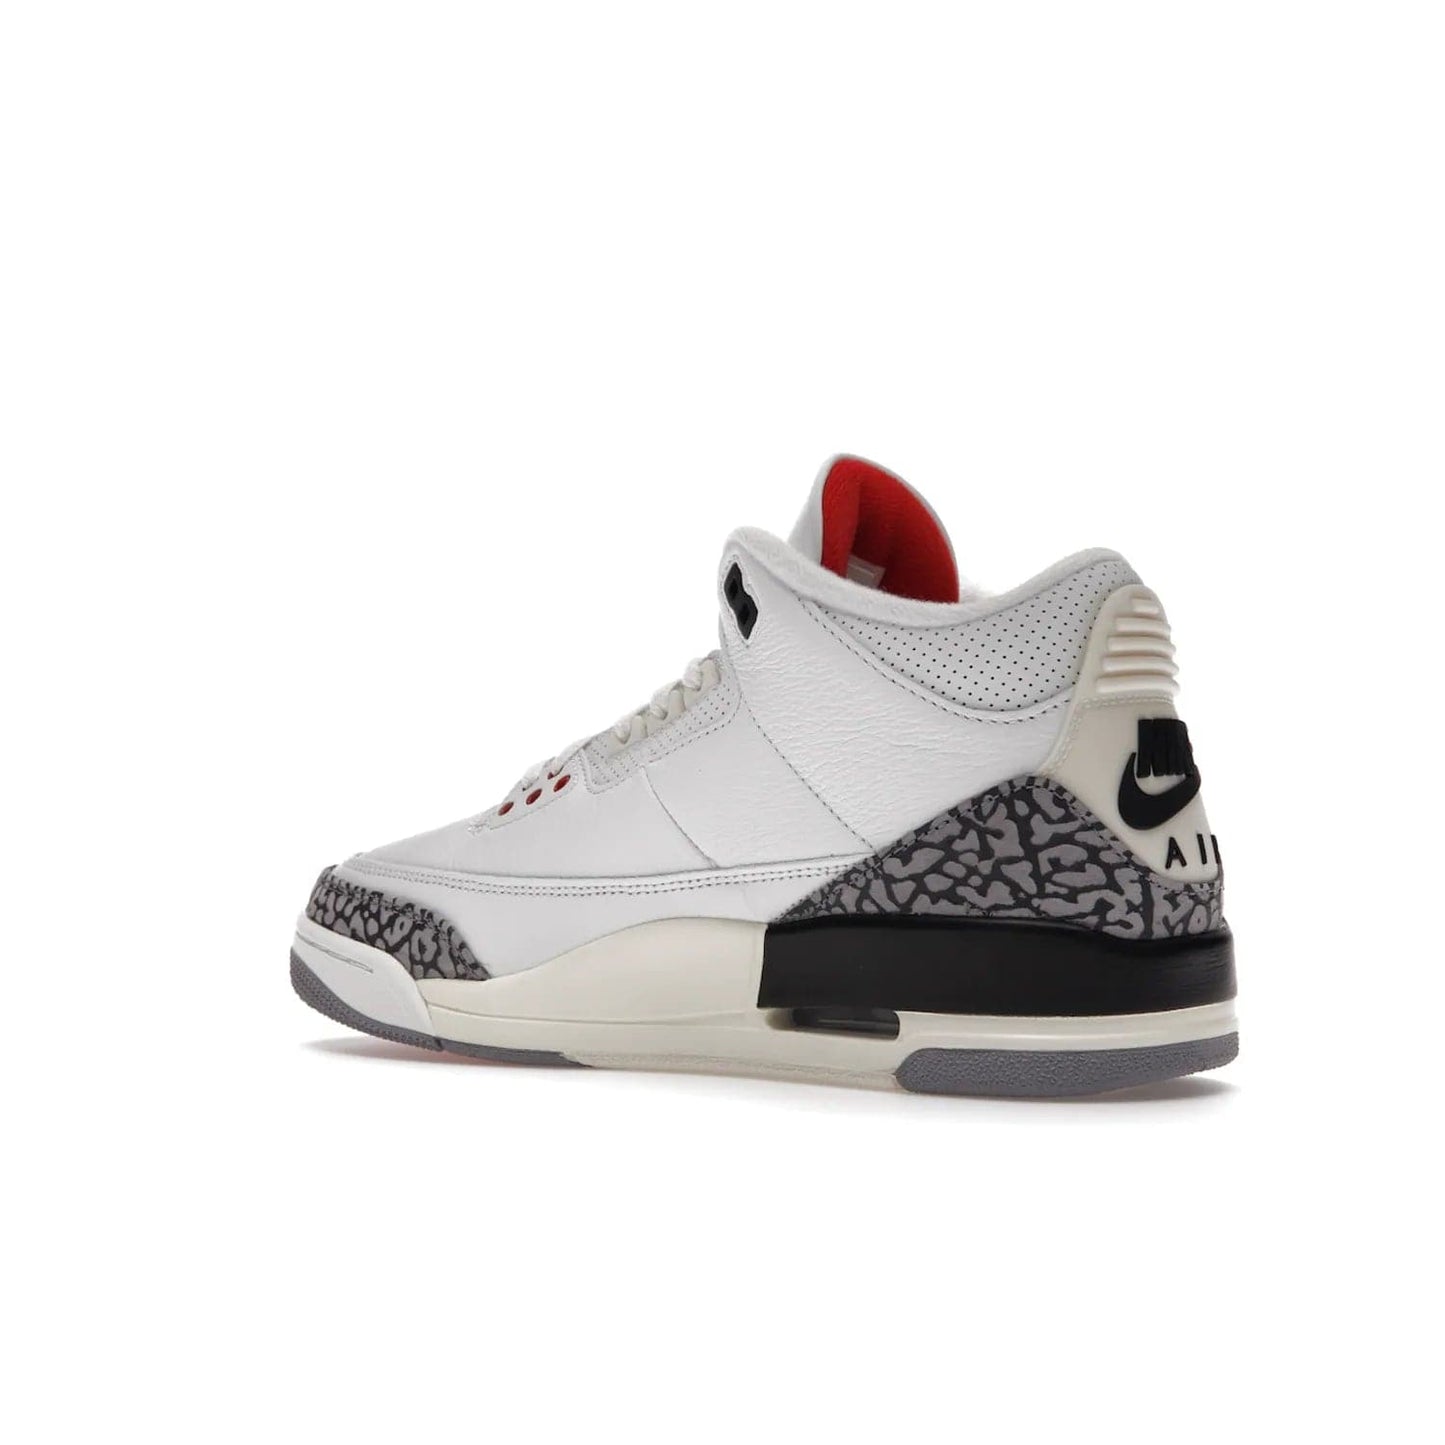 Jordan 3 Retro White Cement Reimagined - Image 23 - Only at www.BallersClubKickz.com - The Reimagined Air Jordan 3 Retro in a Summit White/Fire Red/Black/Cement Grey colorway is launching on March 11, 2023. Featuring a white leather upper, off-white midsoles and heel tabs, this vintage-look sneaker is a must-have.